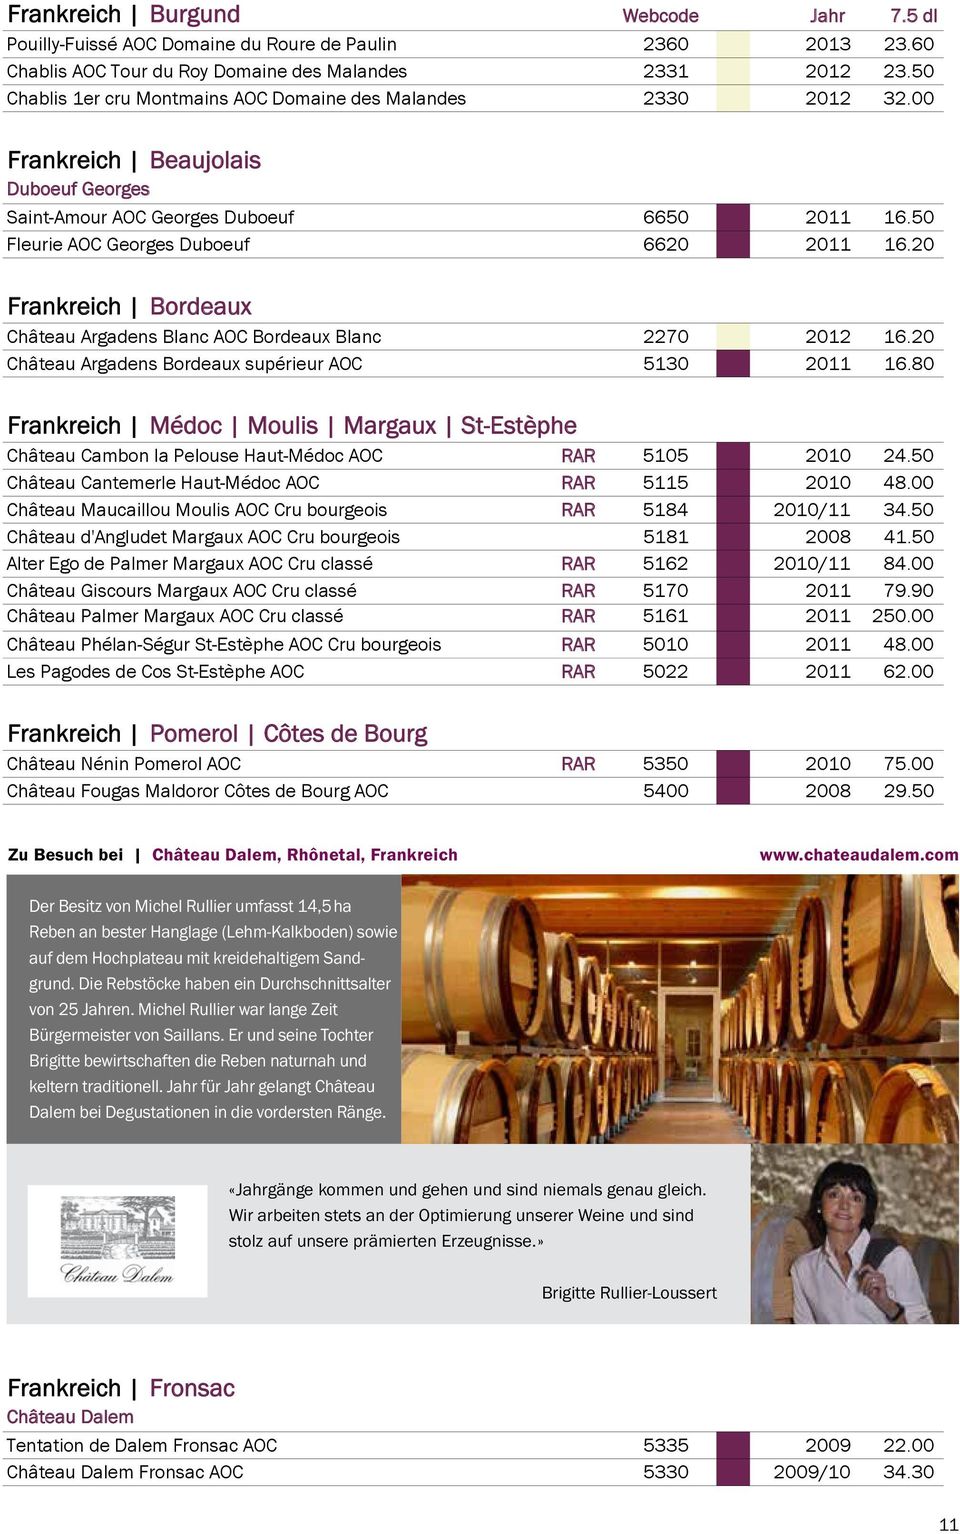 WeinSortiment 2014/ PDF Free Download